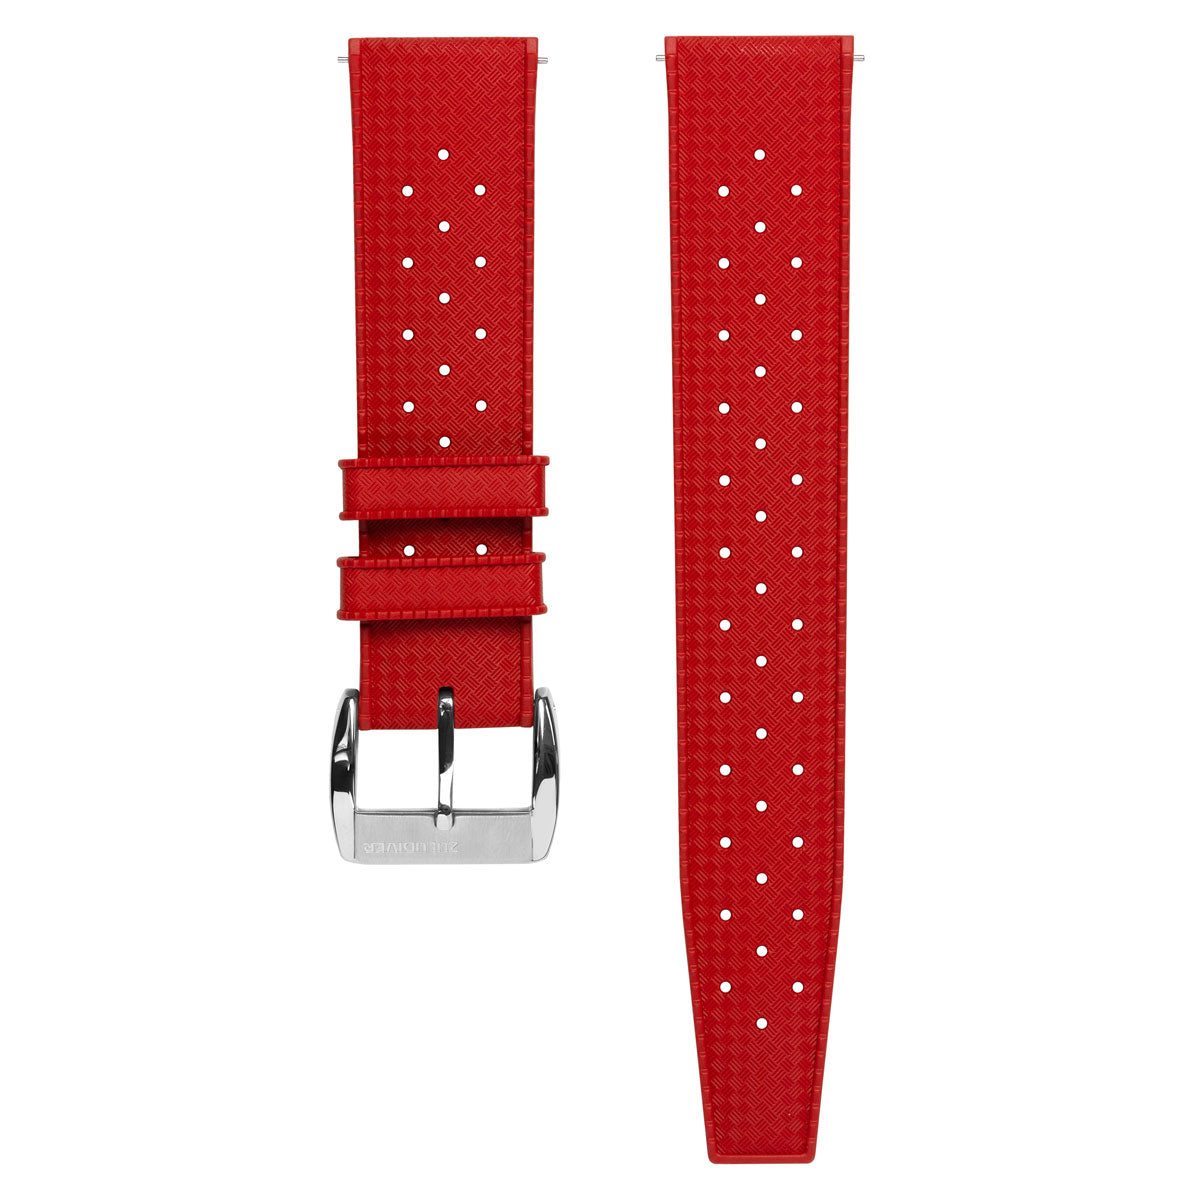 ZULUDIVER Vintage Tropical Style FKM Rubber Watch Strap - Red